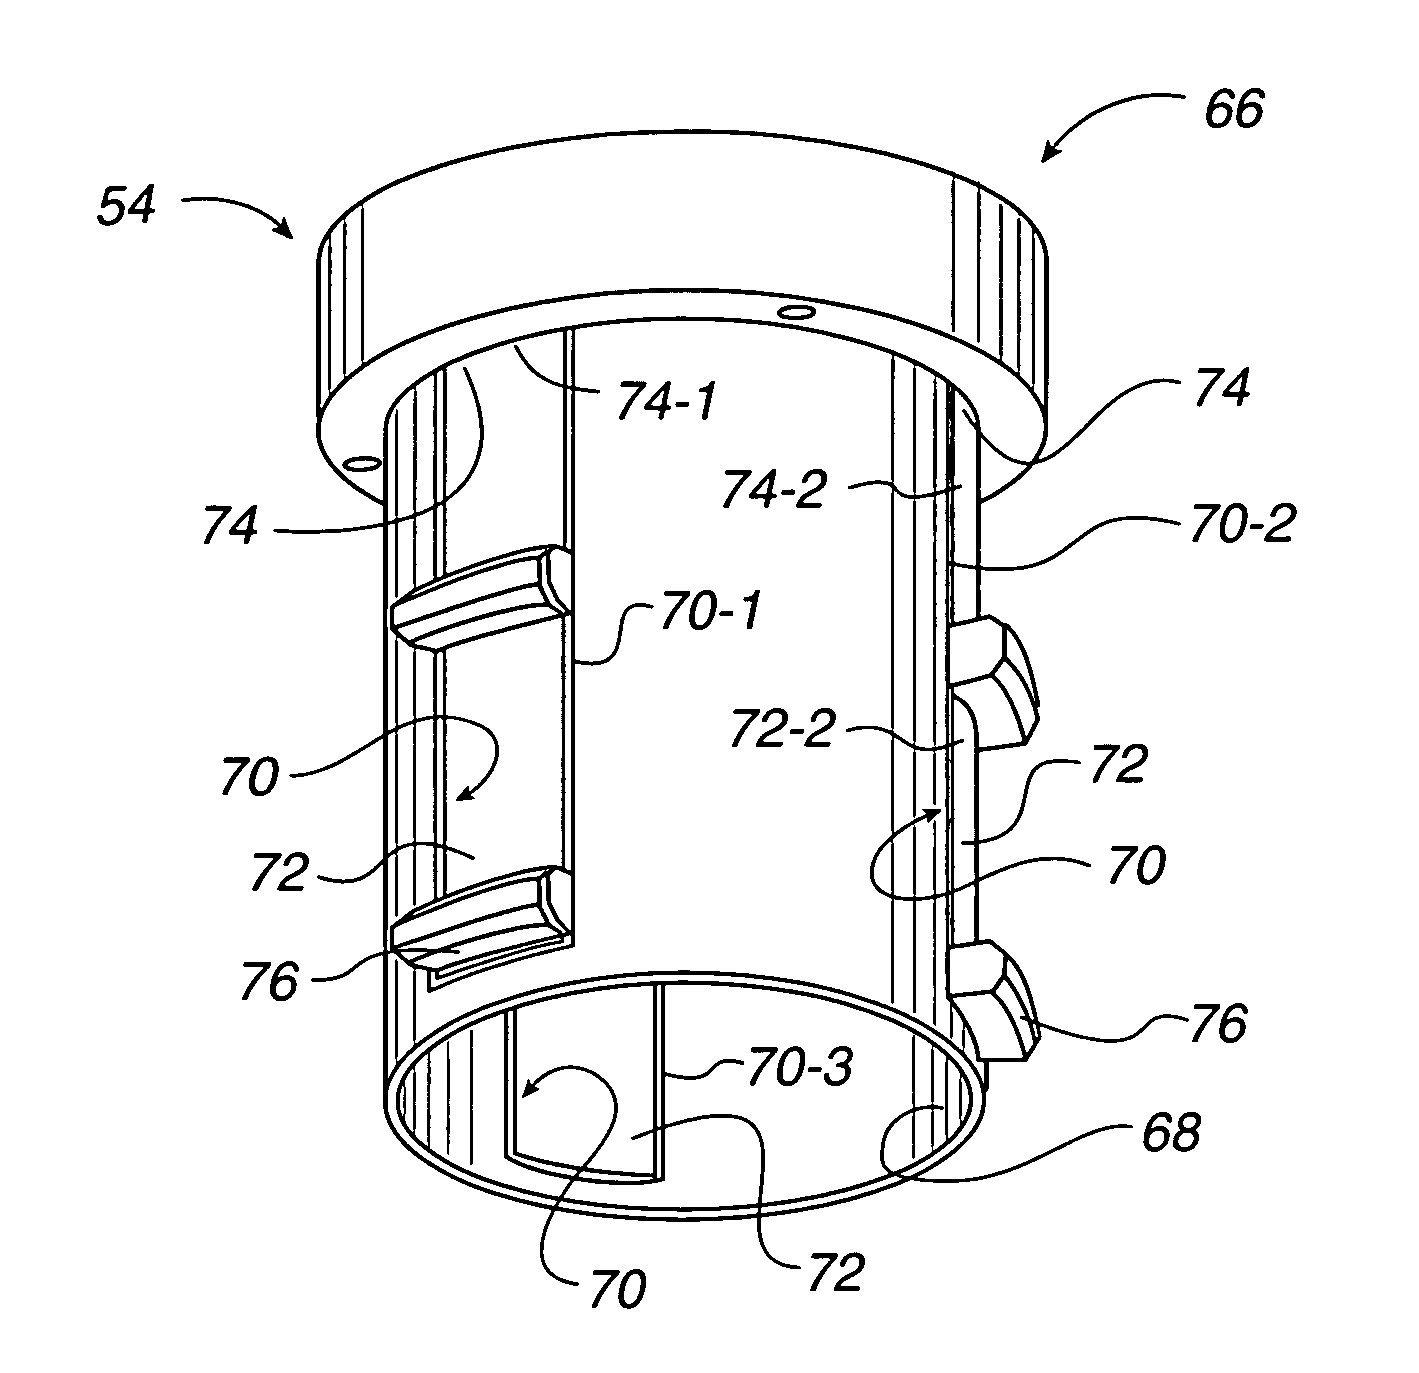 Apparatus for shielding process chamber port